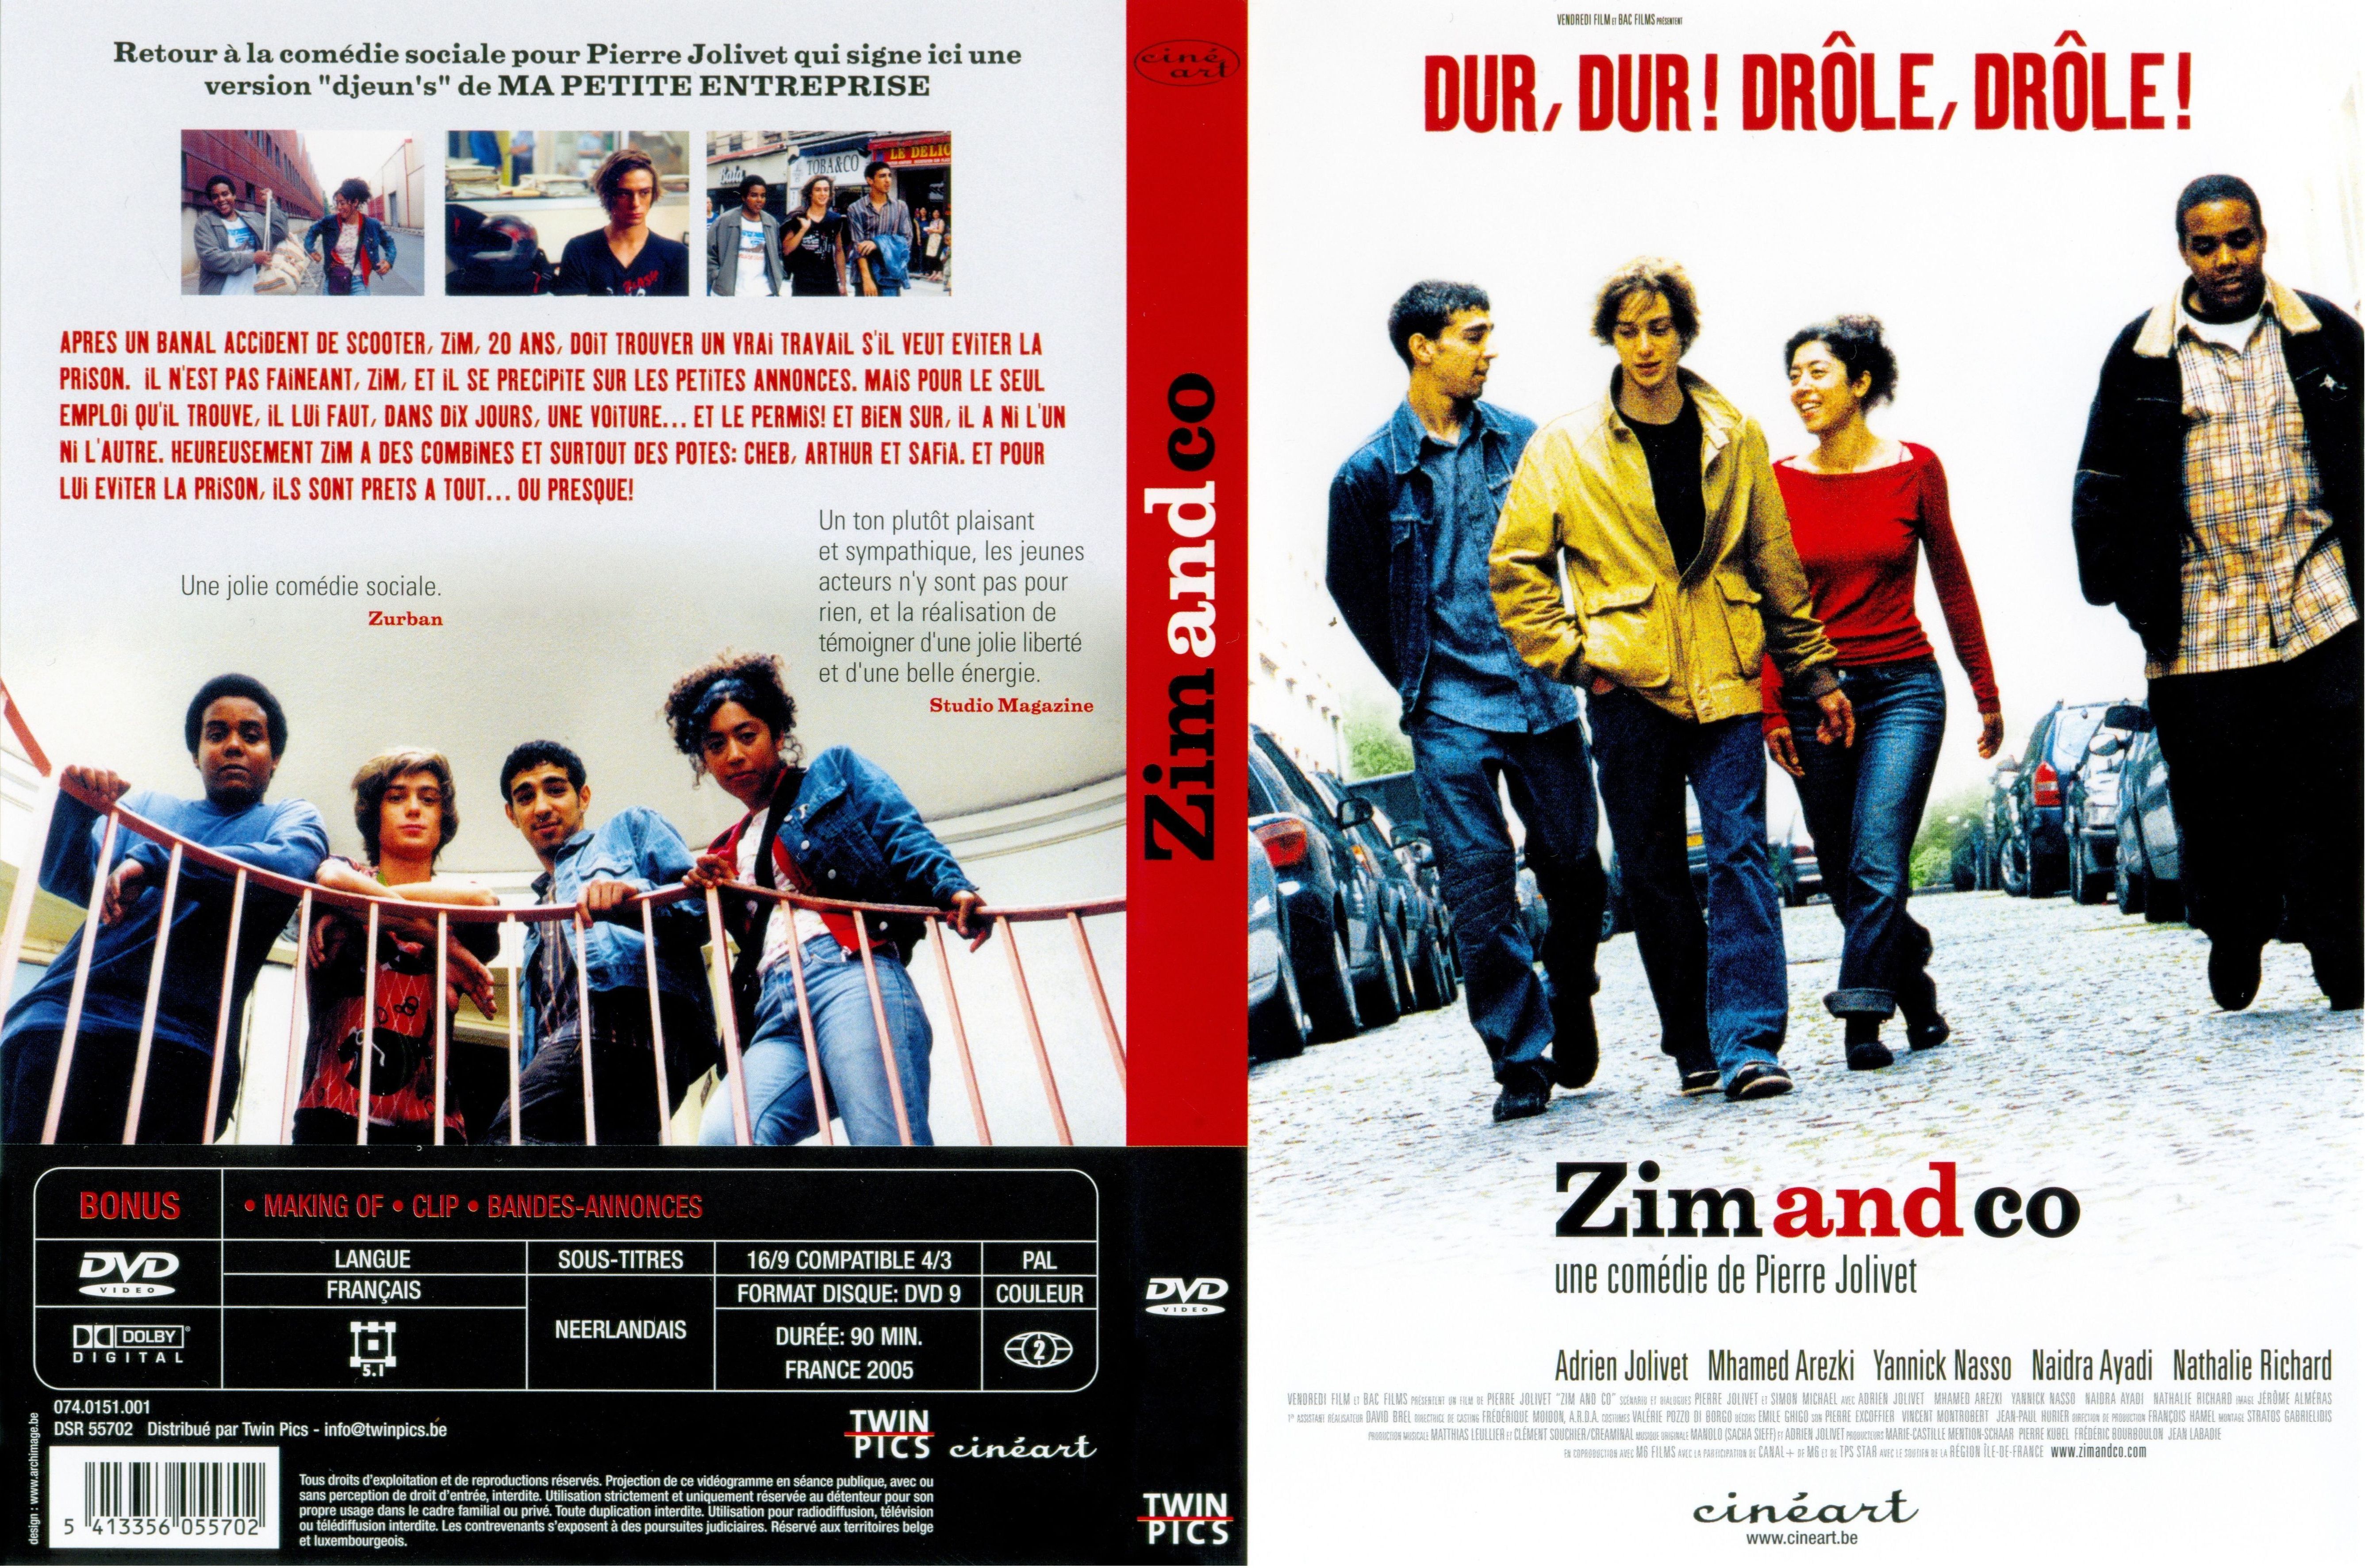 Jaquette DVD Zim and Co v2